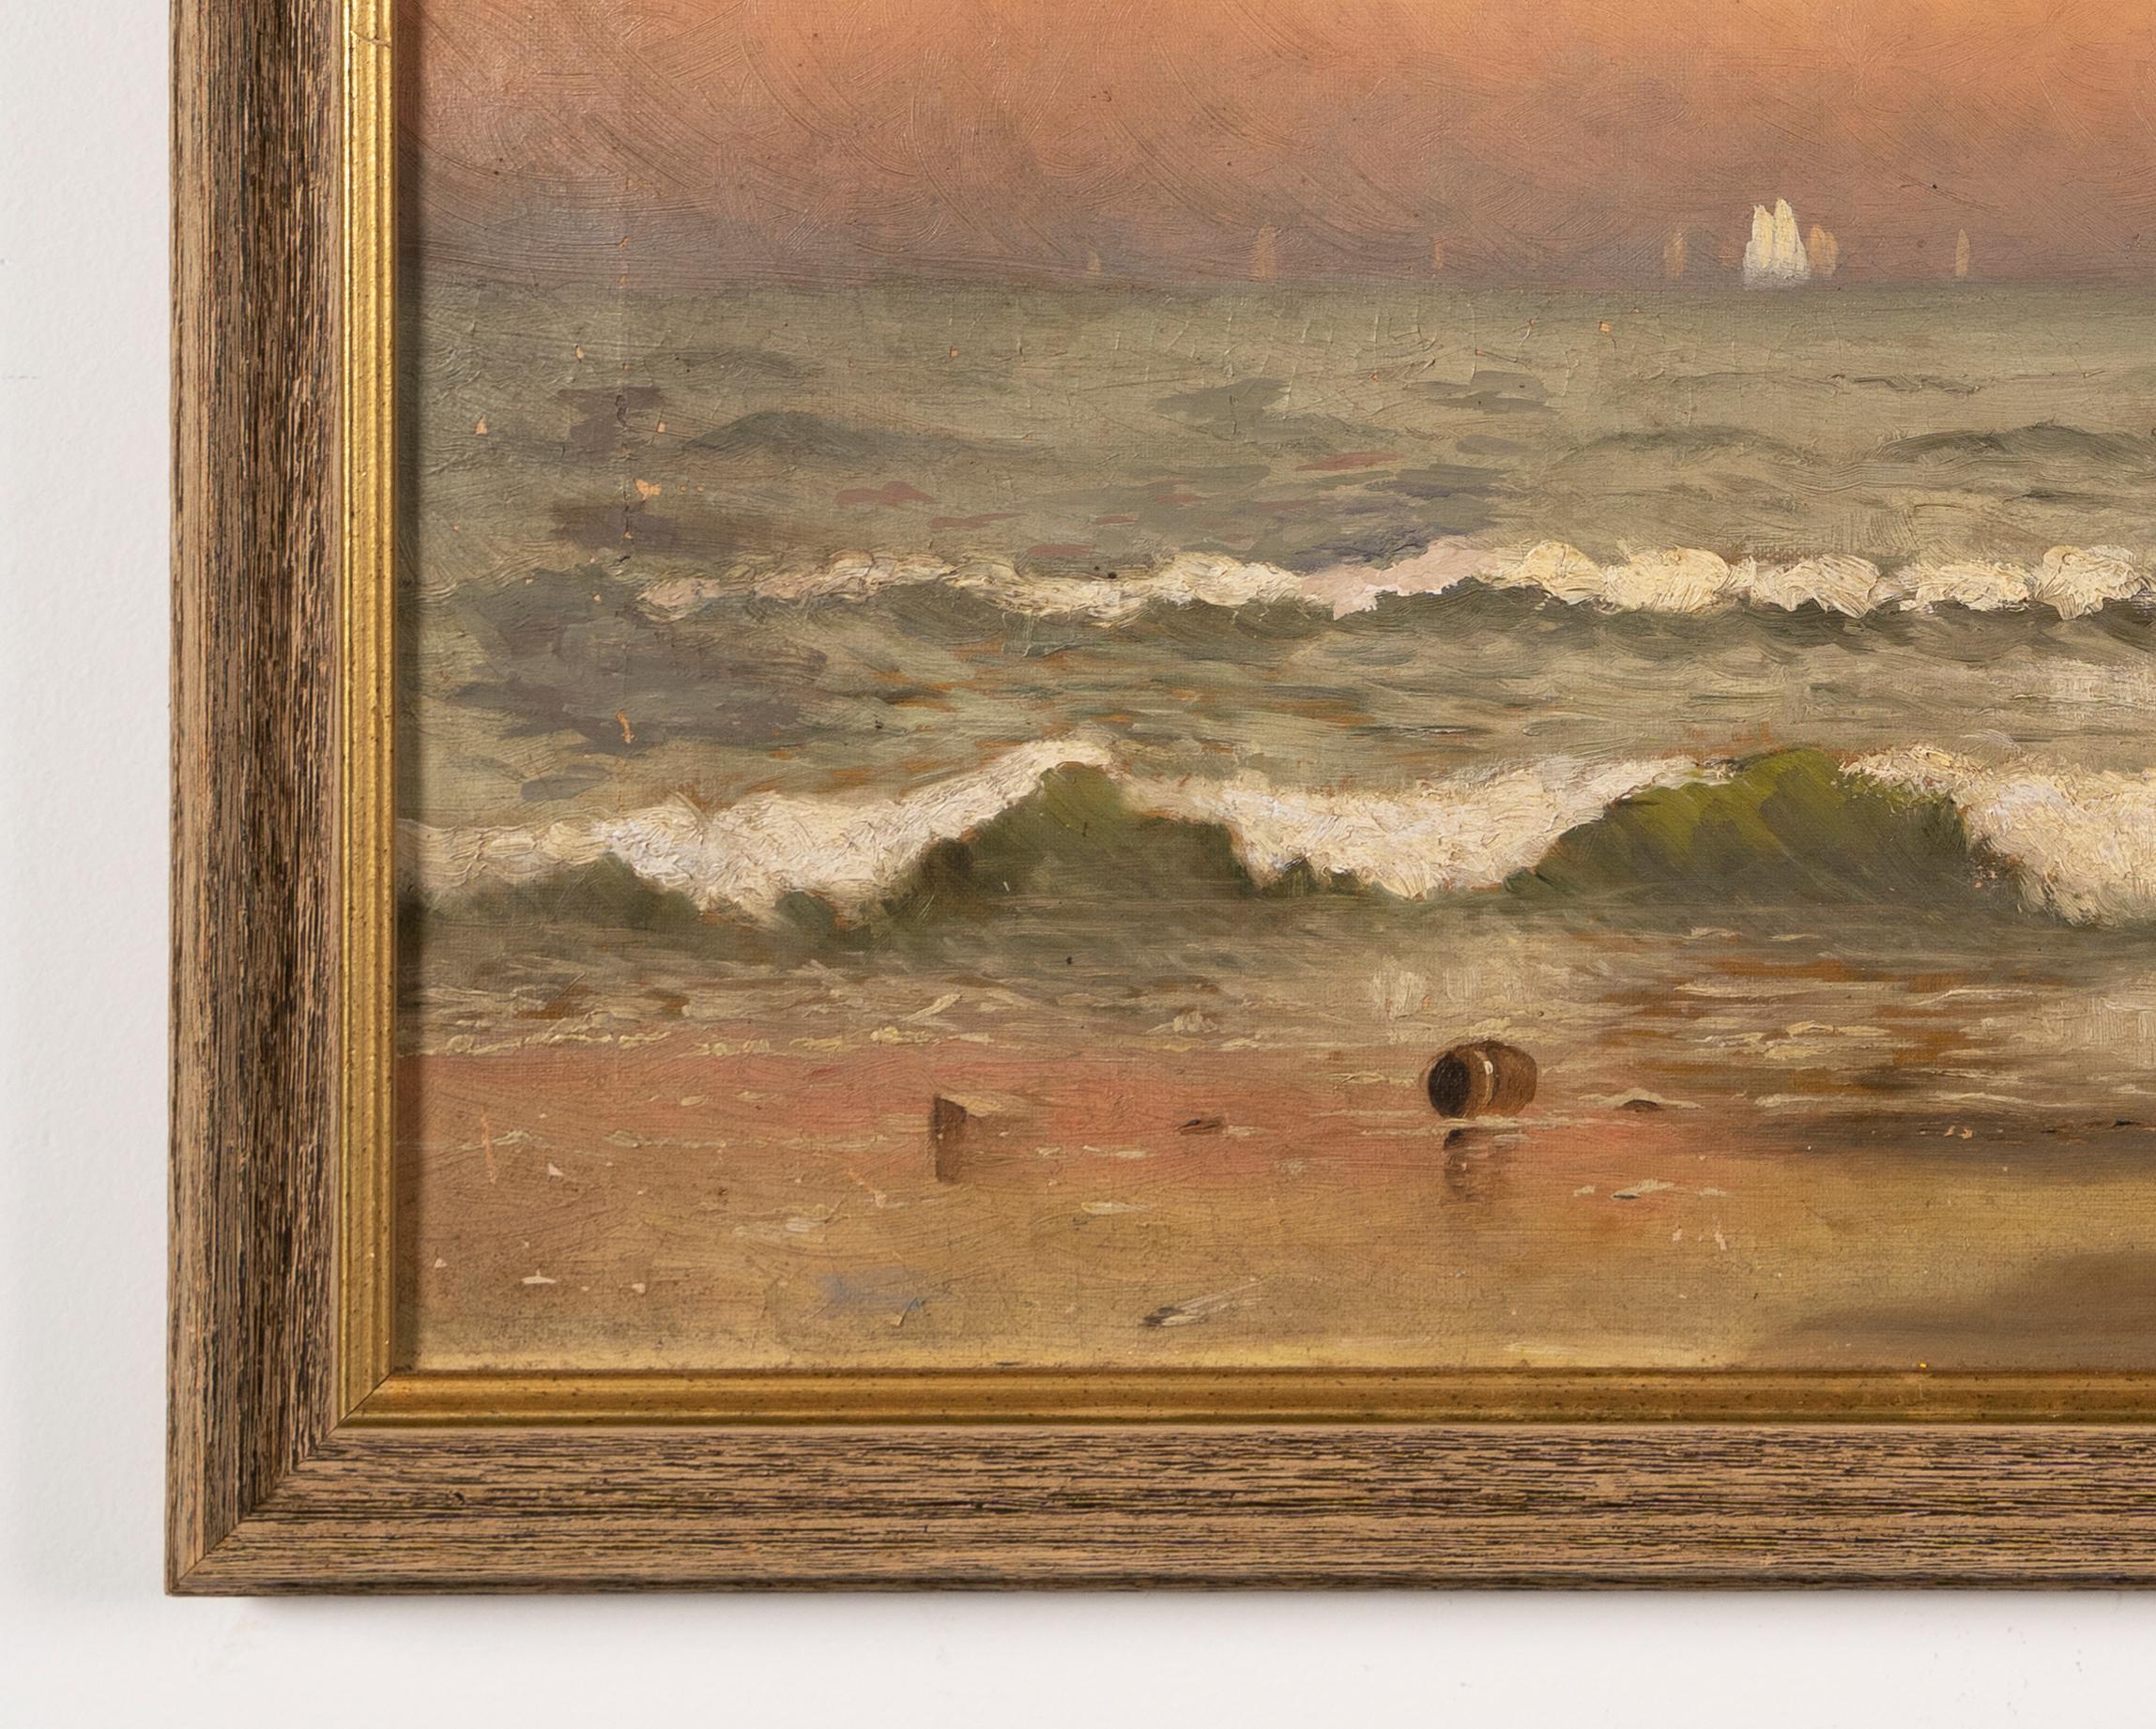 Antique American Hudson River School coastal sunset beach oil painting.  Oil on canvas, circa 1880.  No signature found.  Image size, 26L x 16H.  Framed